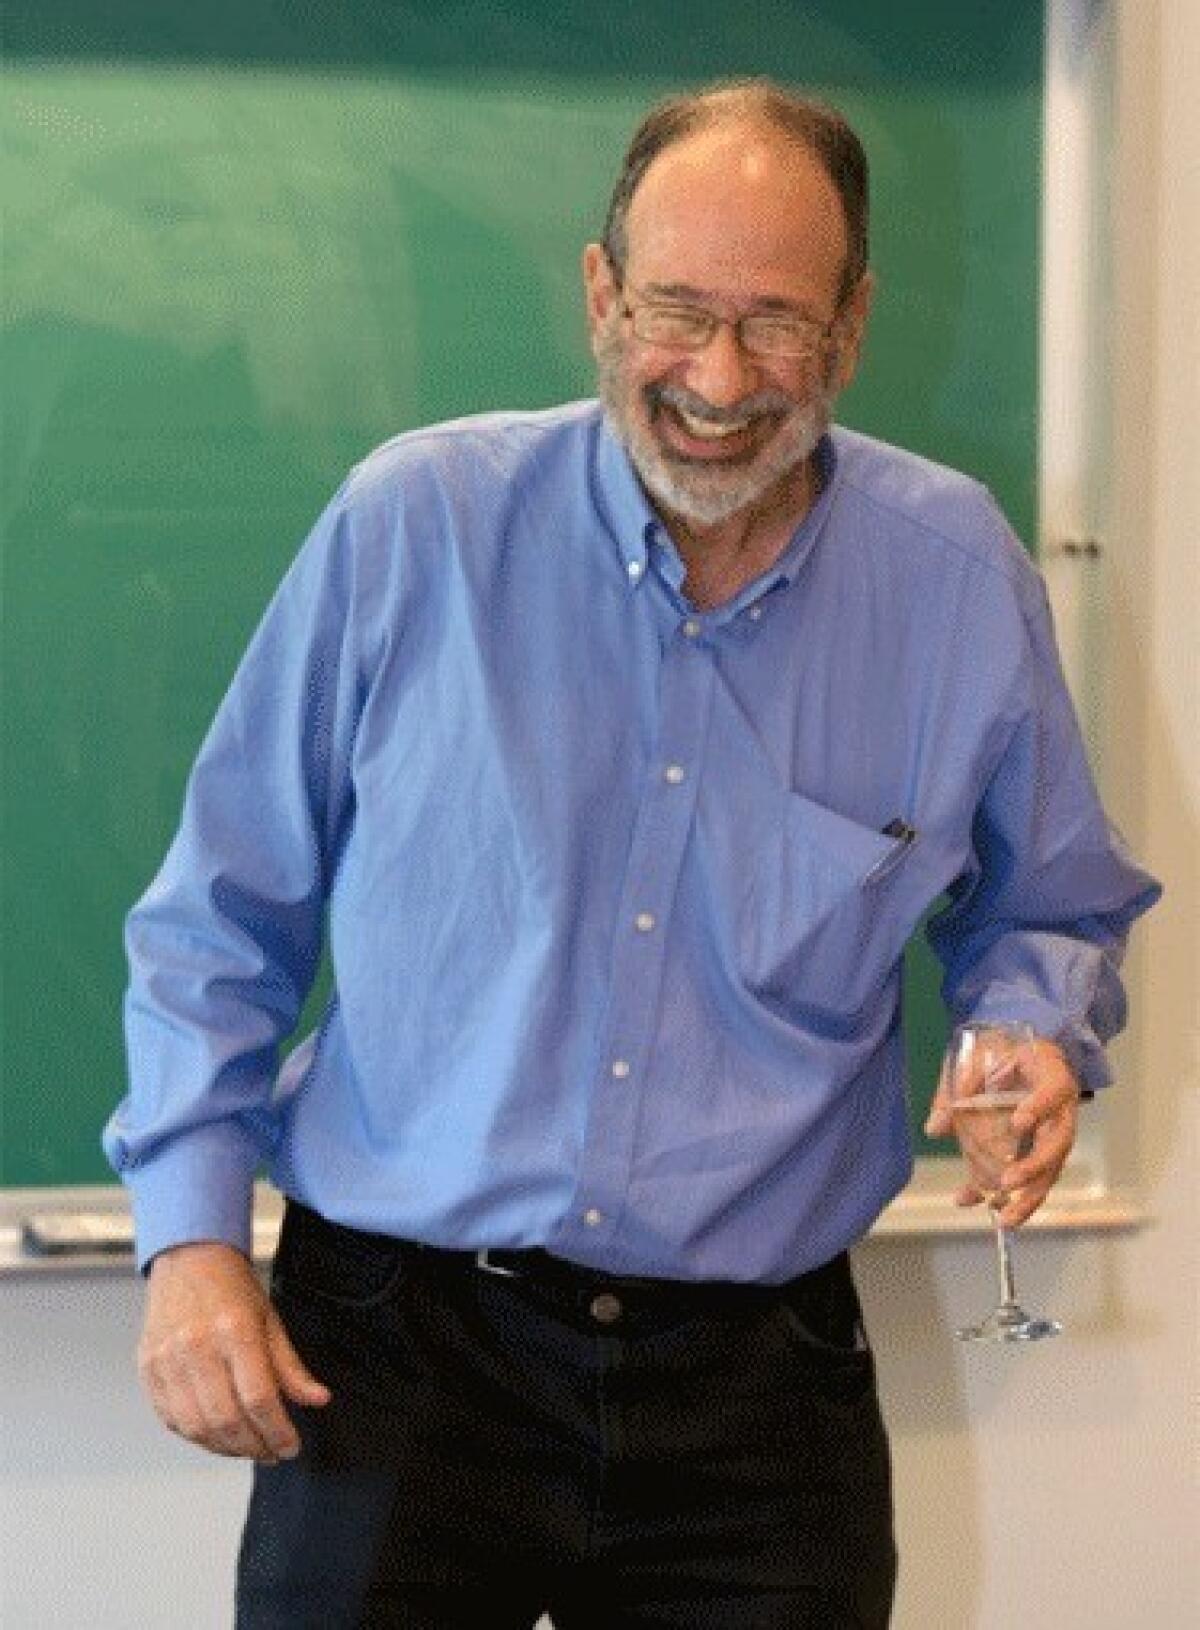 Alvin Roth, a Harvard Business School professor who is currently a visiting professor at Stanford University, reacts during an economics class after receiving a toast from students for being awarded a Nobel Memorial Prize in Economic Sciences.